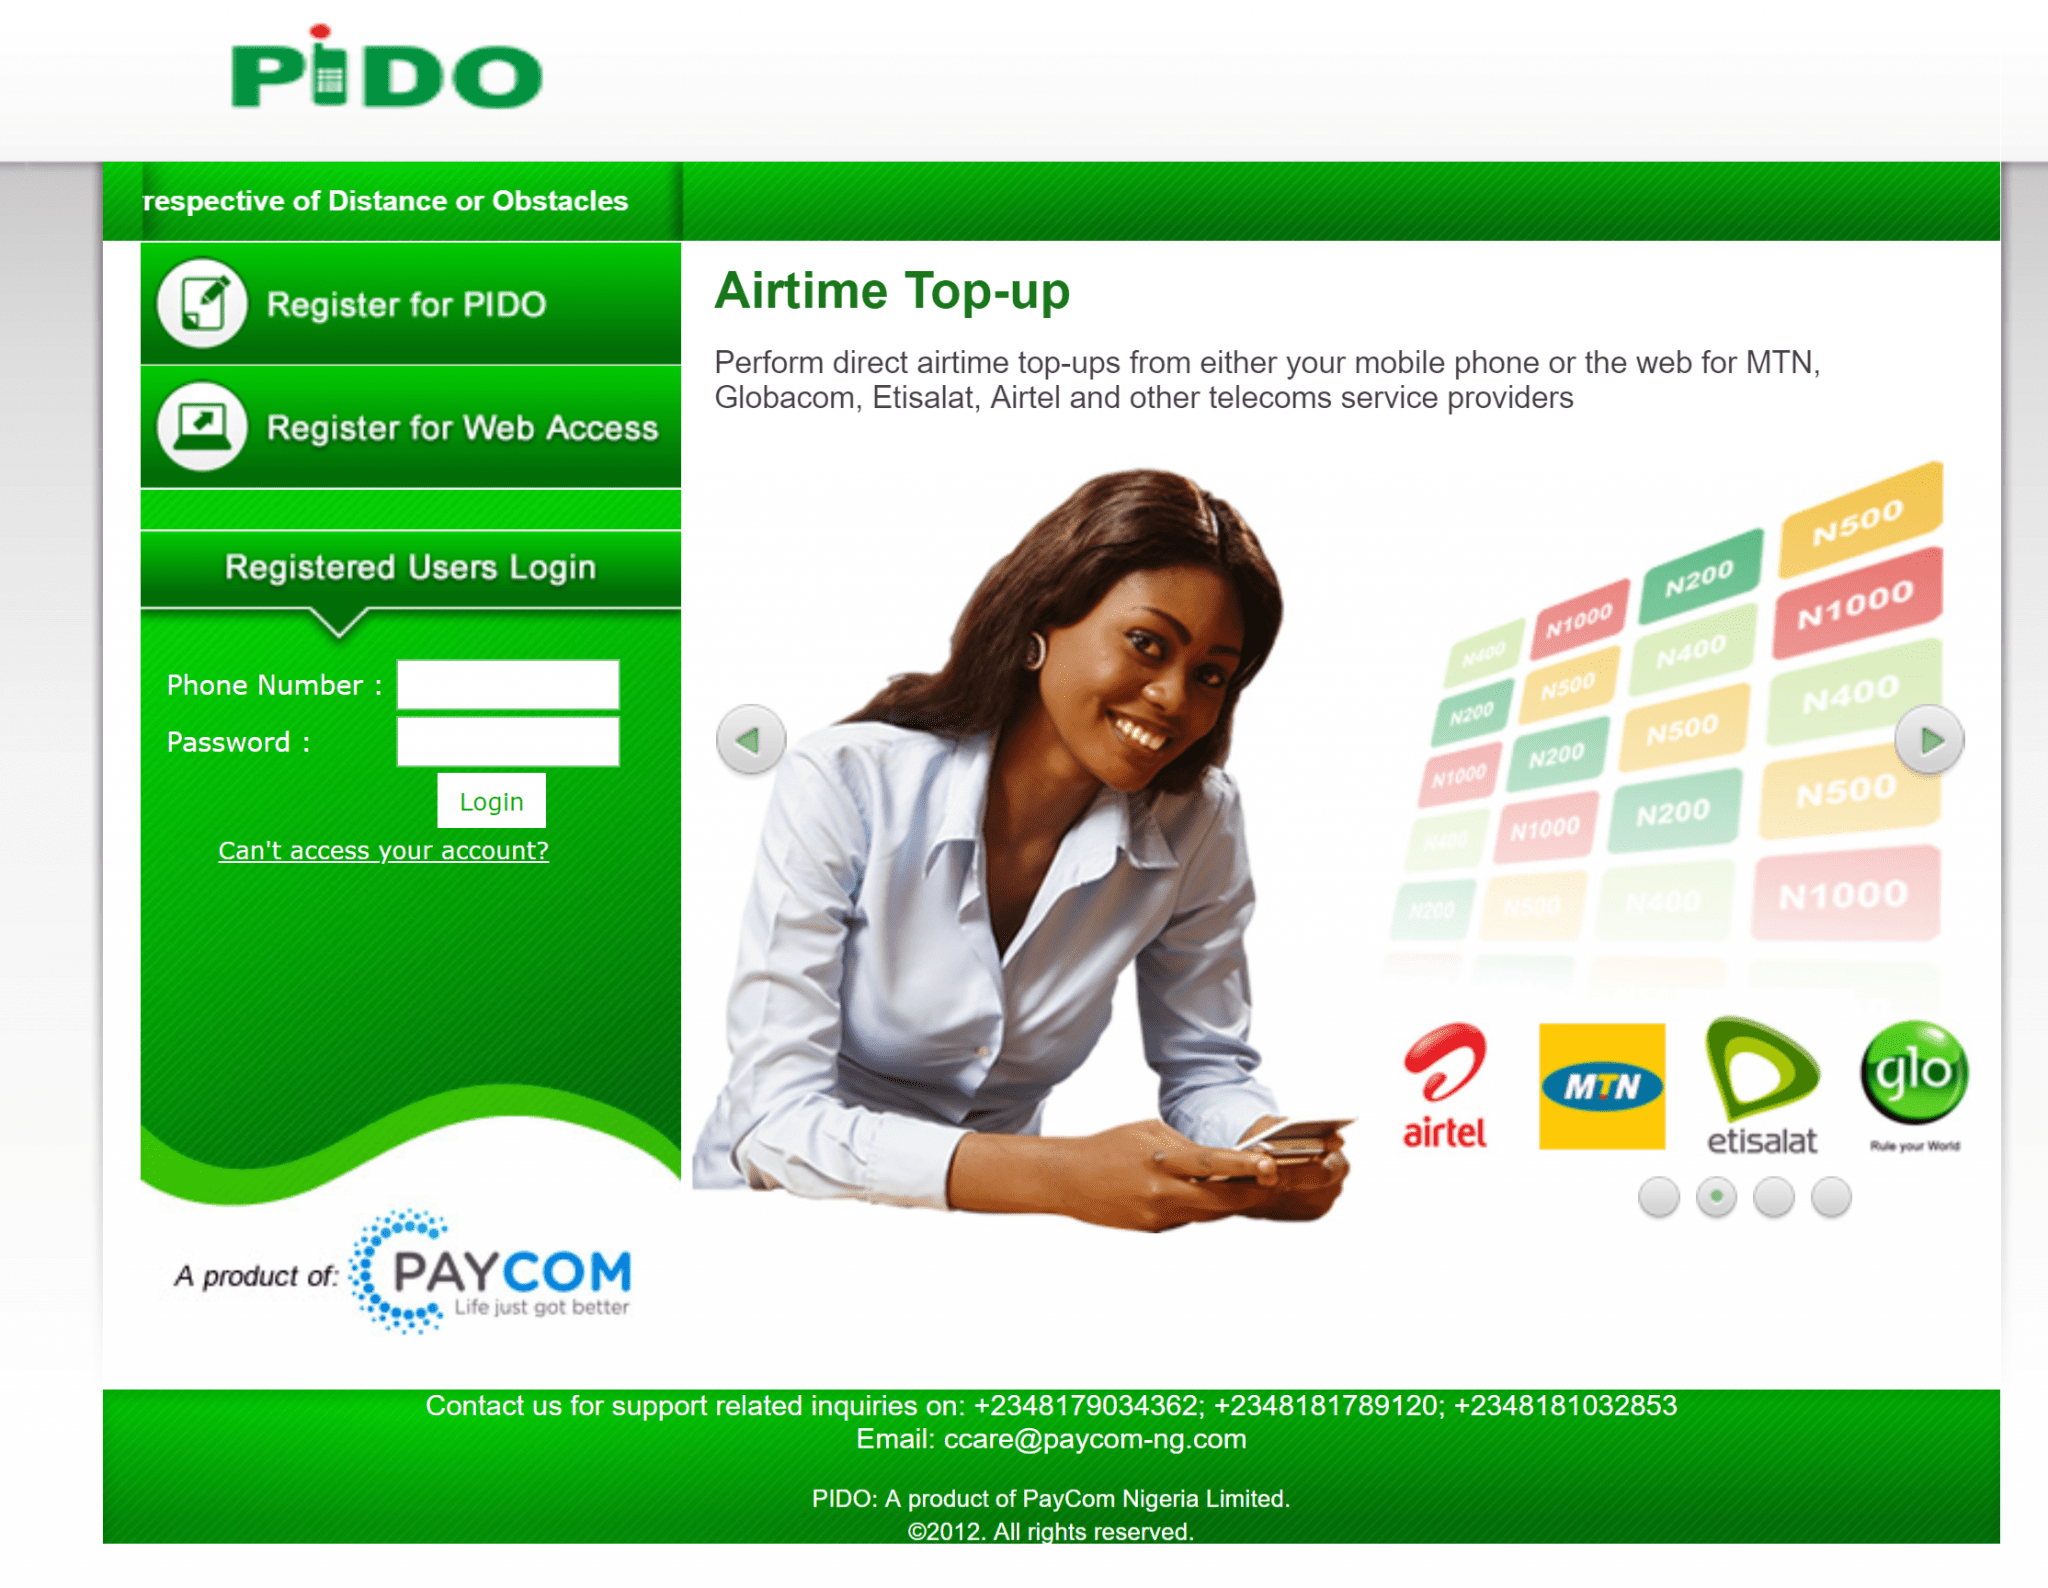 PIDO: A product of PayCom Nigeria Limited, seen above, allows users perform direct airtime top-ups from either your mobile phone or the web for MTN, Globacom, Etisalat, Airtel and other telecoms service providers, among other features.